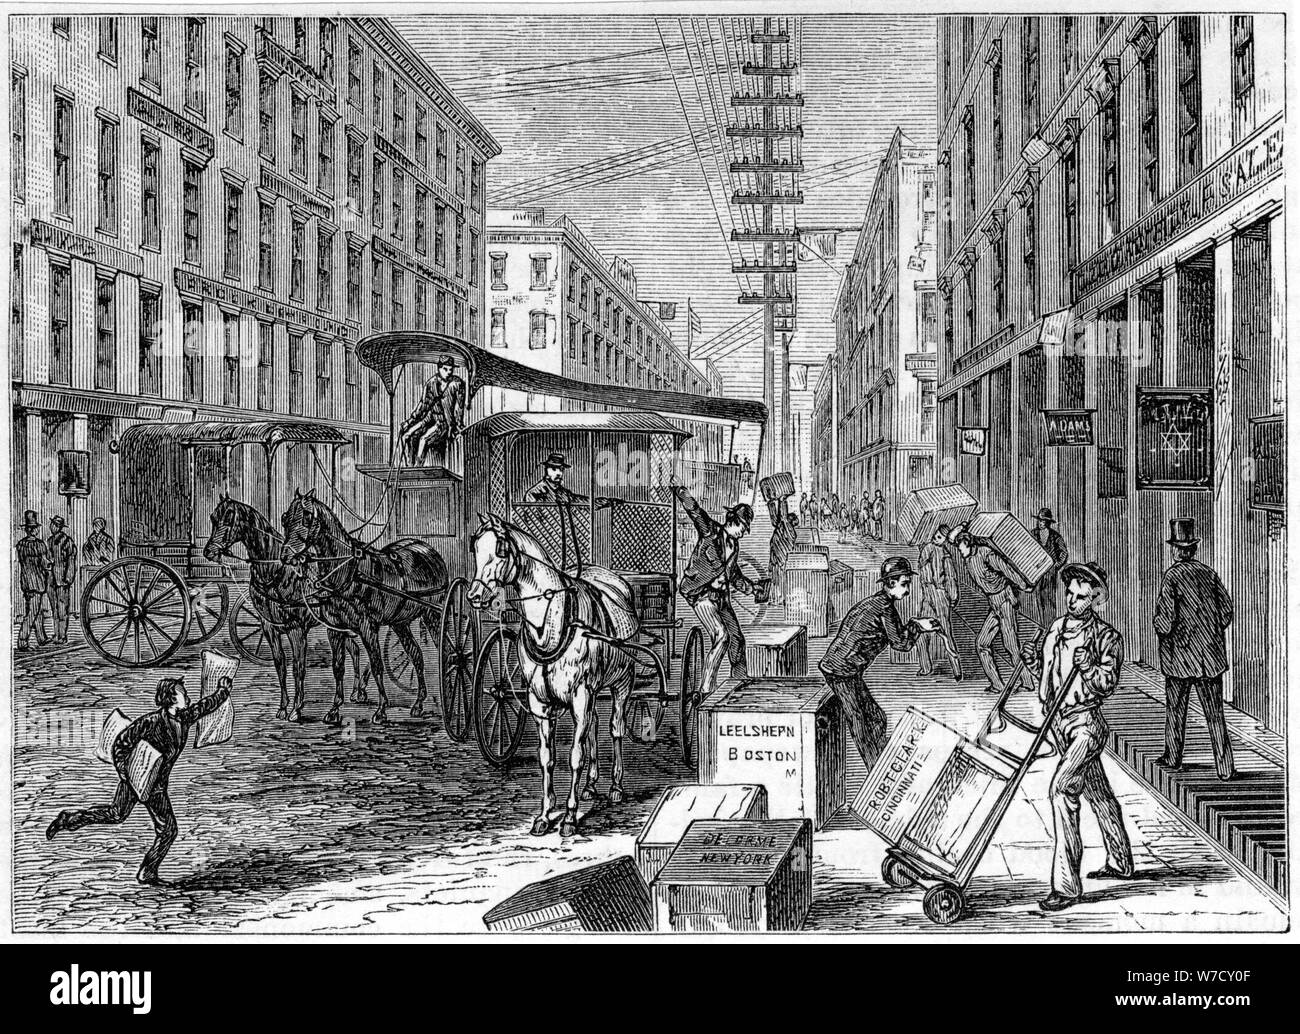 Deliveries and collections taking place at Wells Fargo depot, New York, USA, 1875. Artist: Unknown Stock Photo